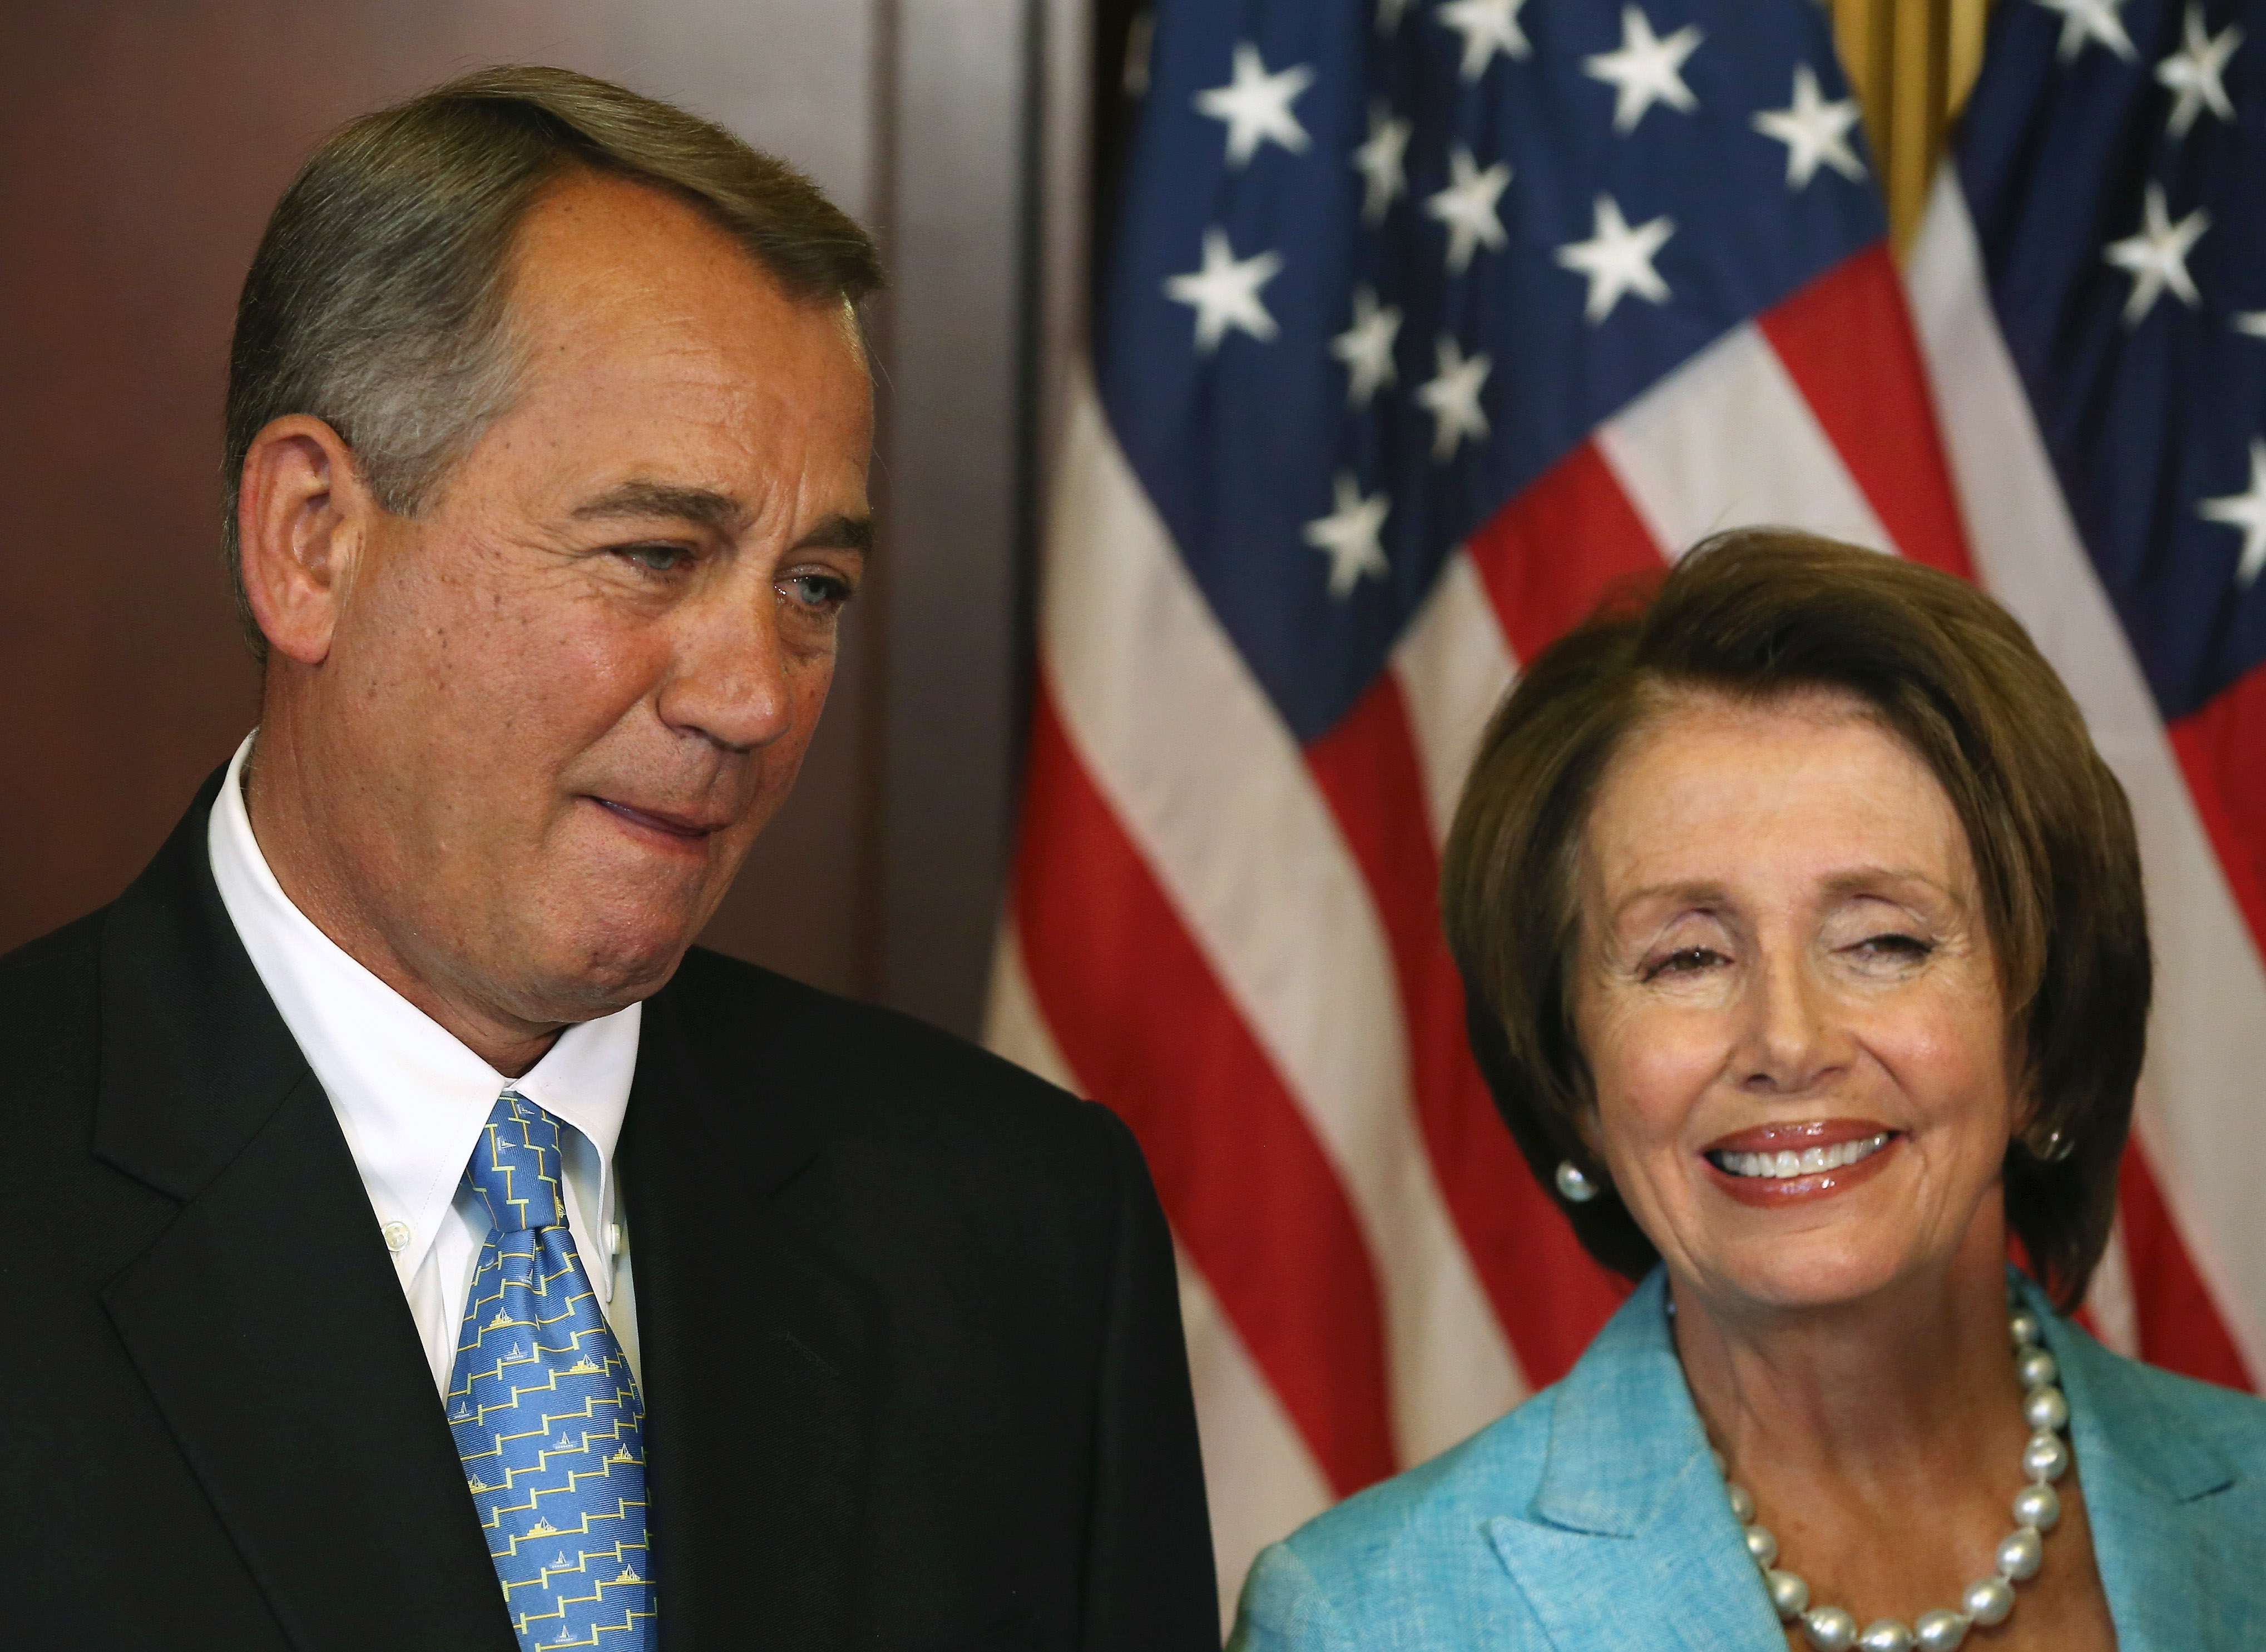 House Minority Leader Nancy Pelosi and House Speaker John Boehner await to sign bipartisan legislation Workforce Innovation and Opportunity Act at the U.S. Capitol, July 11, 2014 in Washington, DC. (Mark Wilson—Getty Images)